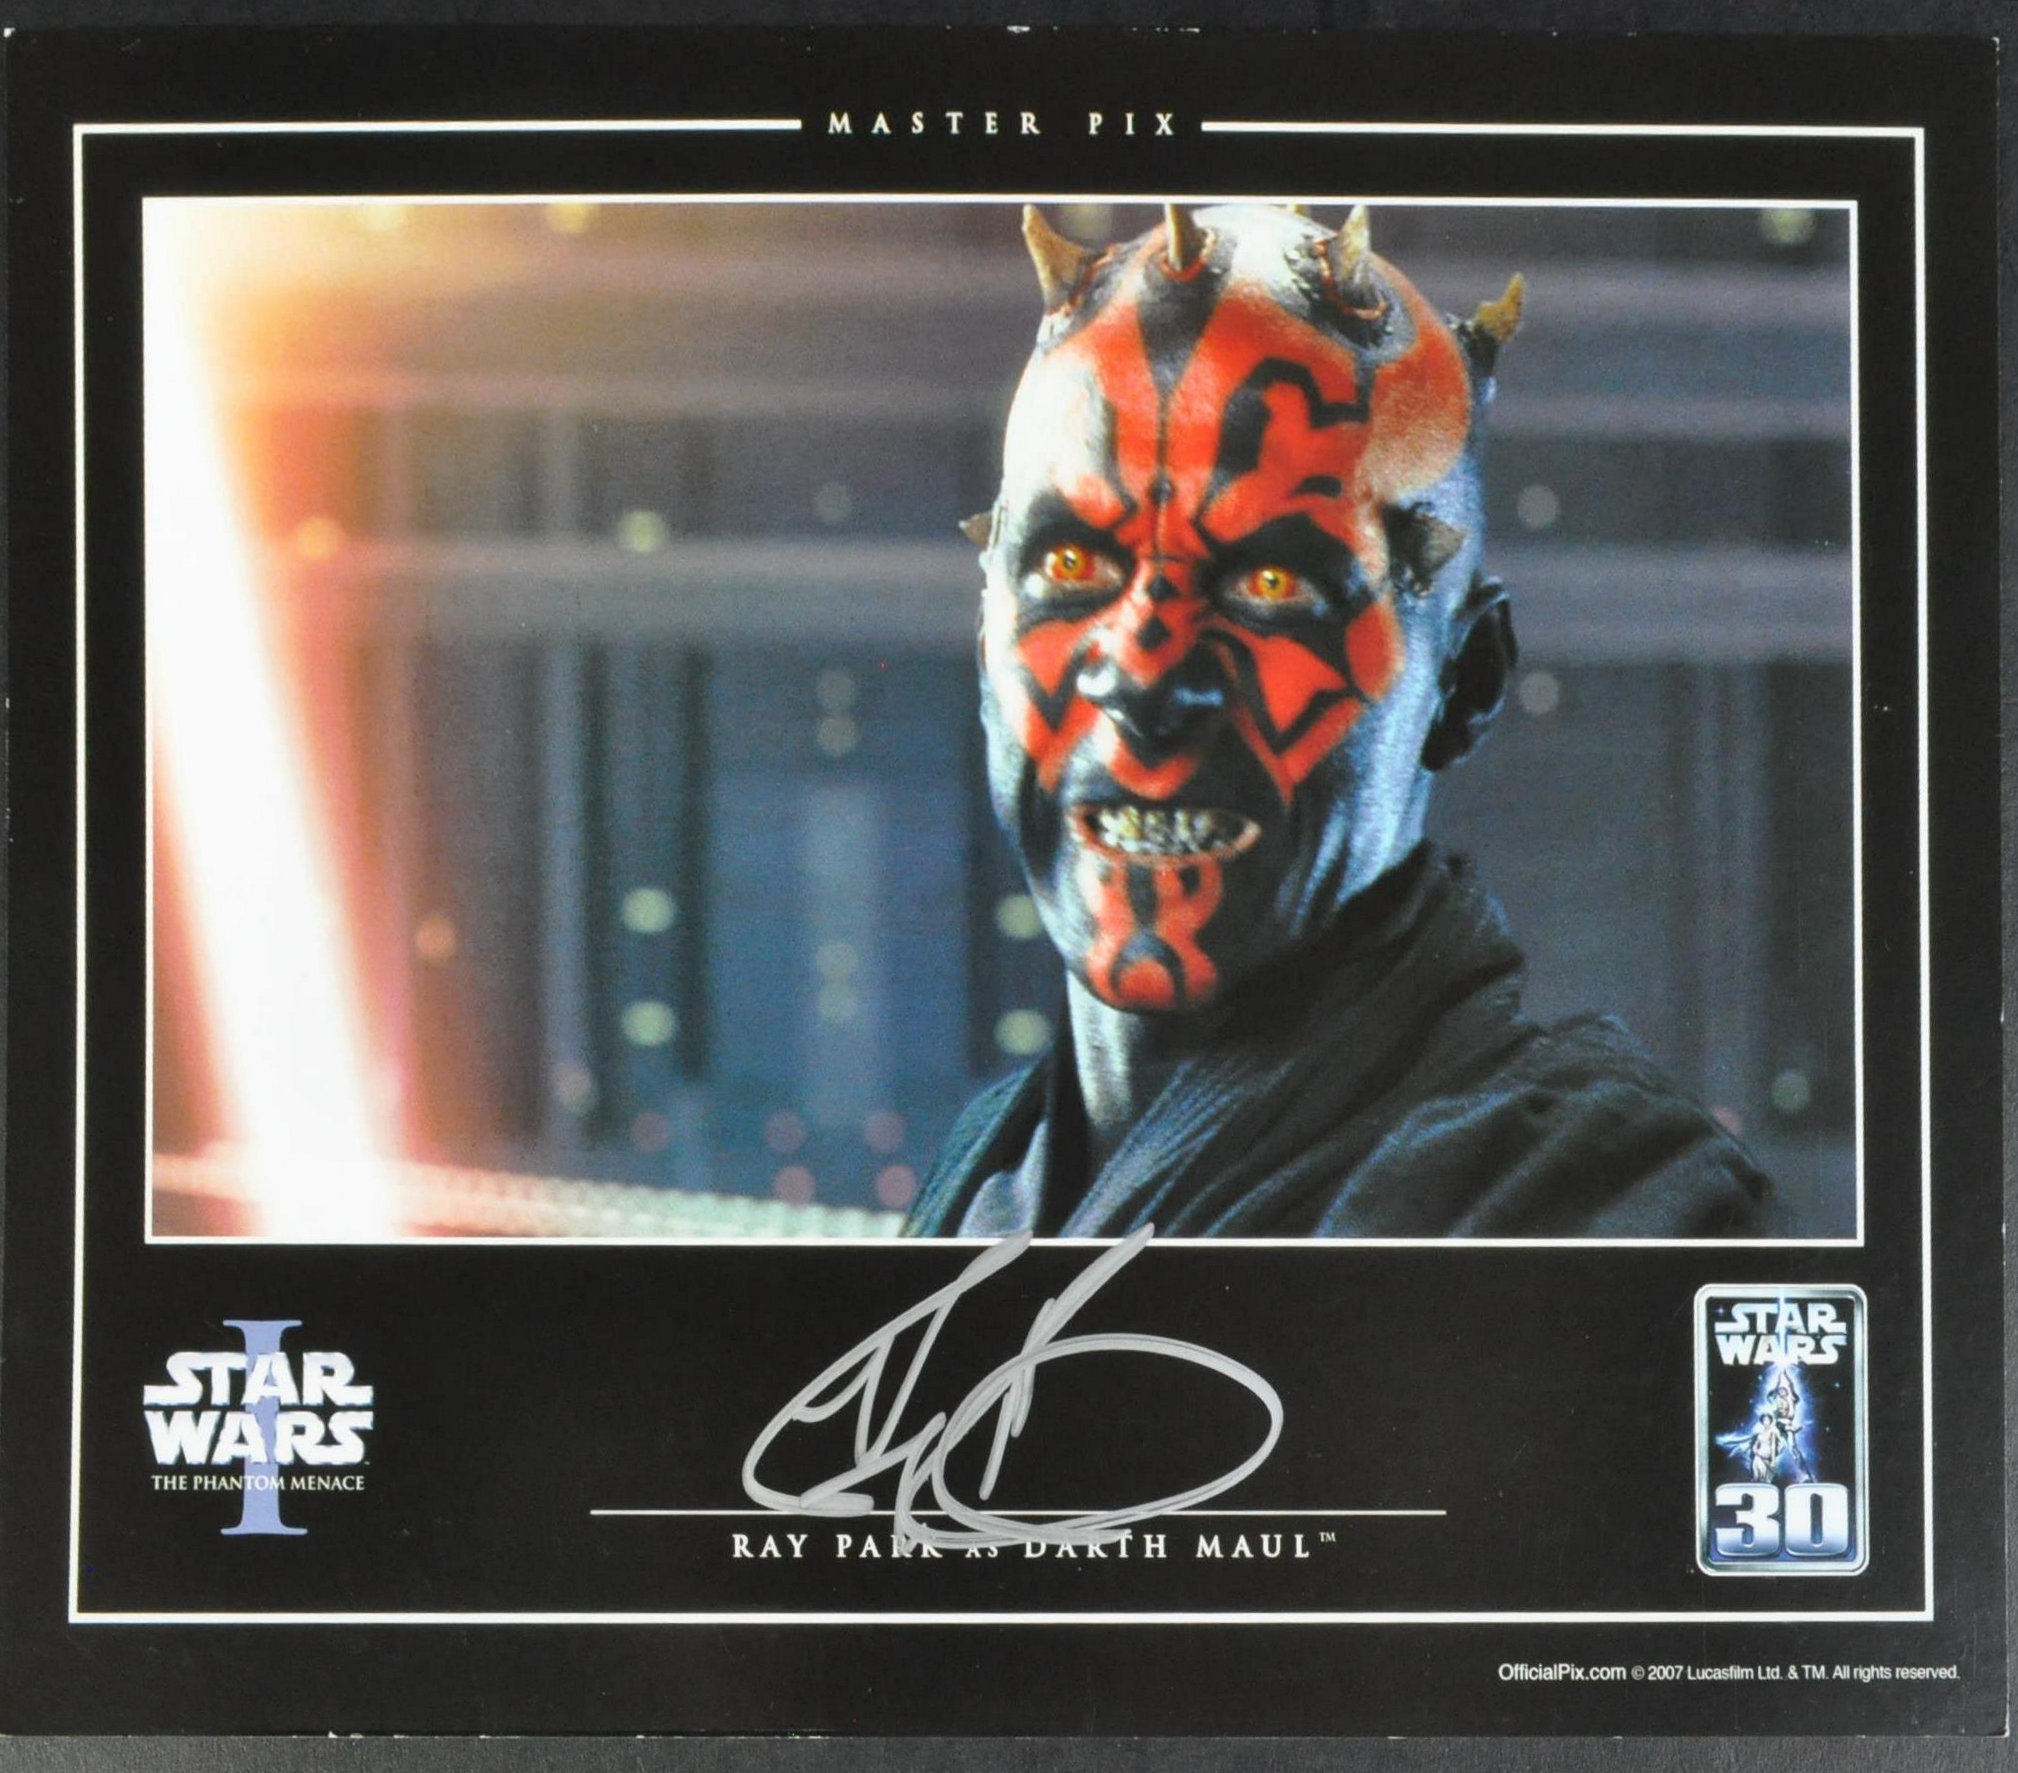 ESTATE OF DAVE PROWSE - STAR WARS - RAY PARK SIGNED OFFICIAL PIX PHOTO